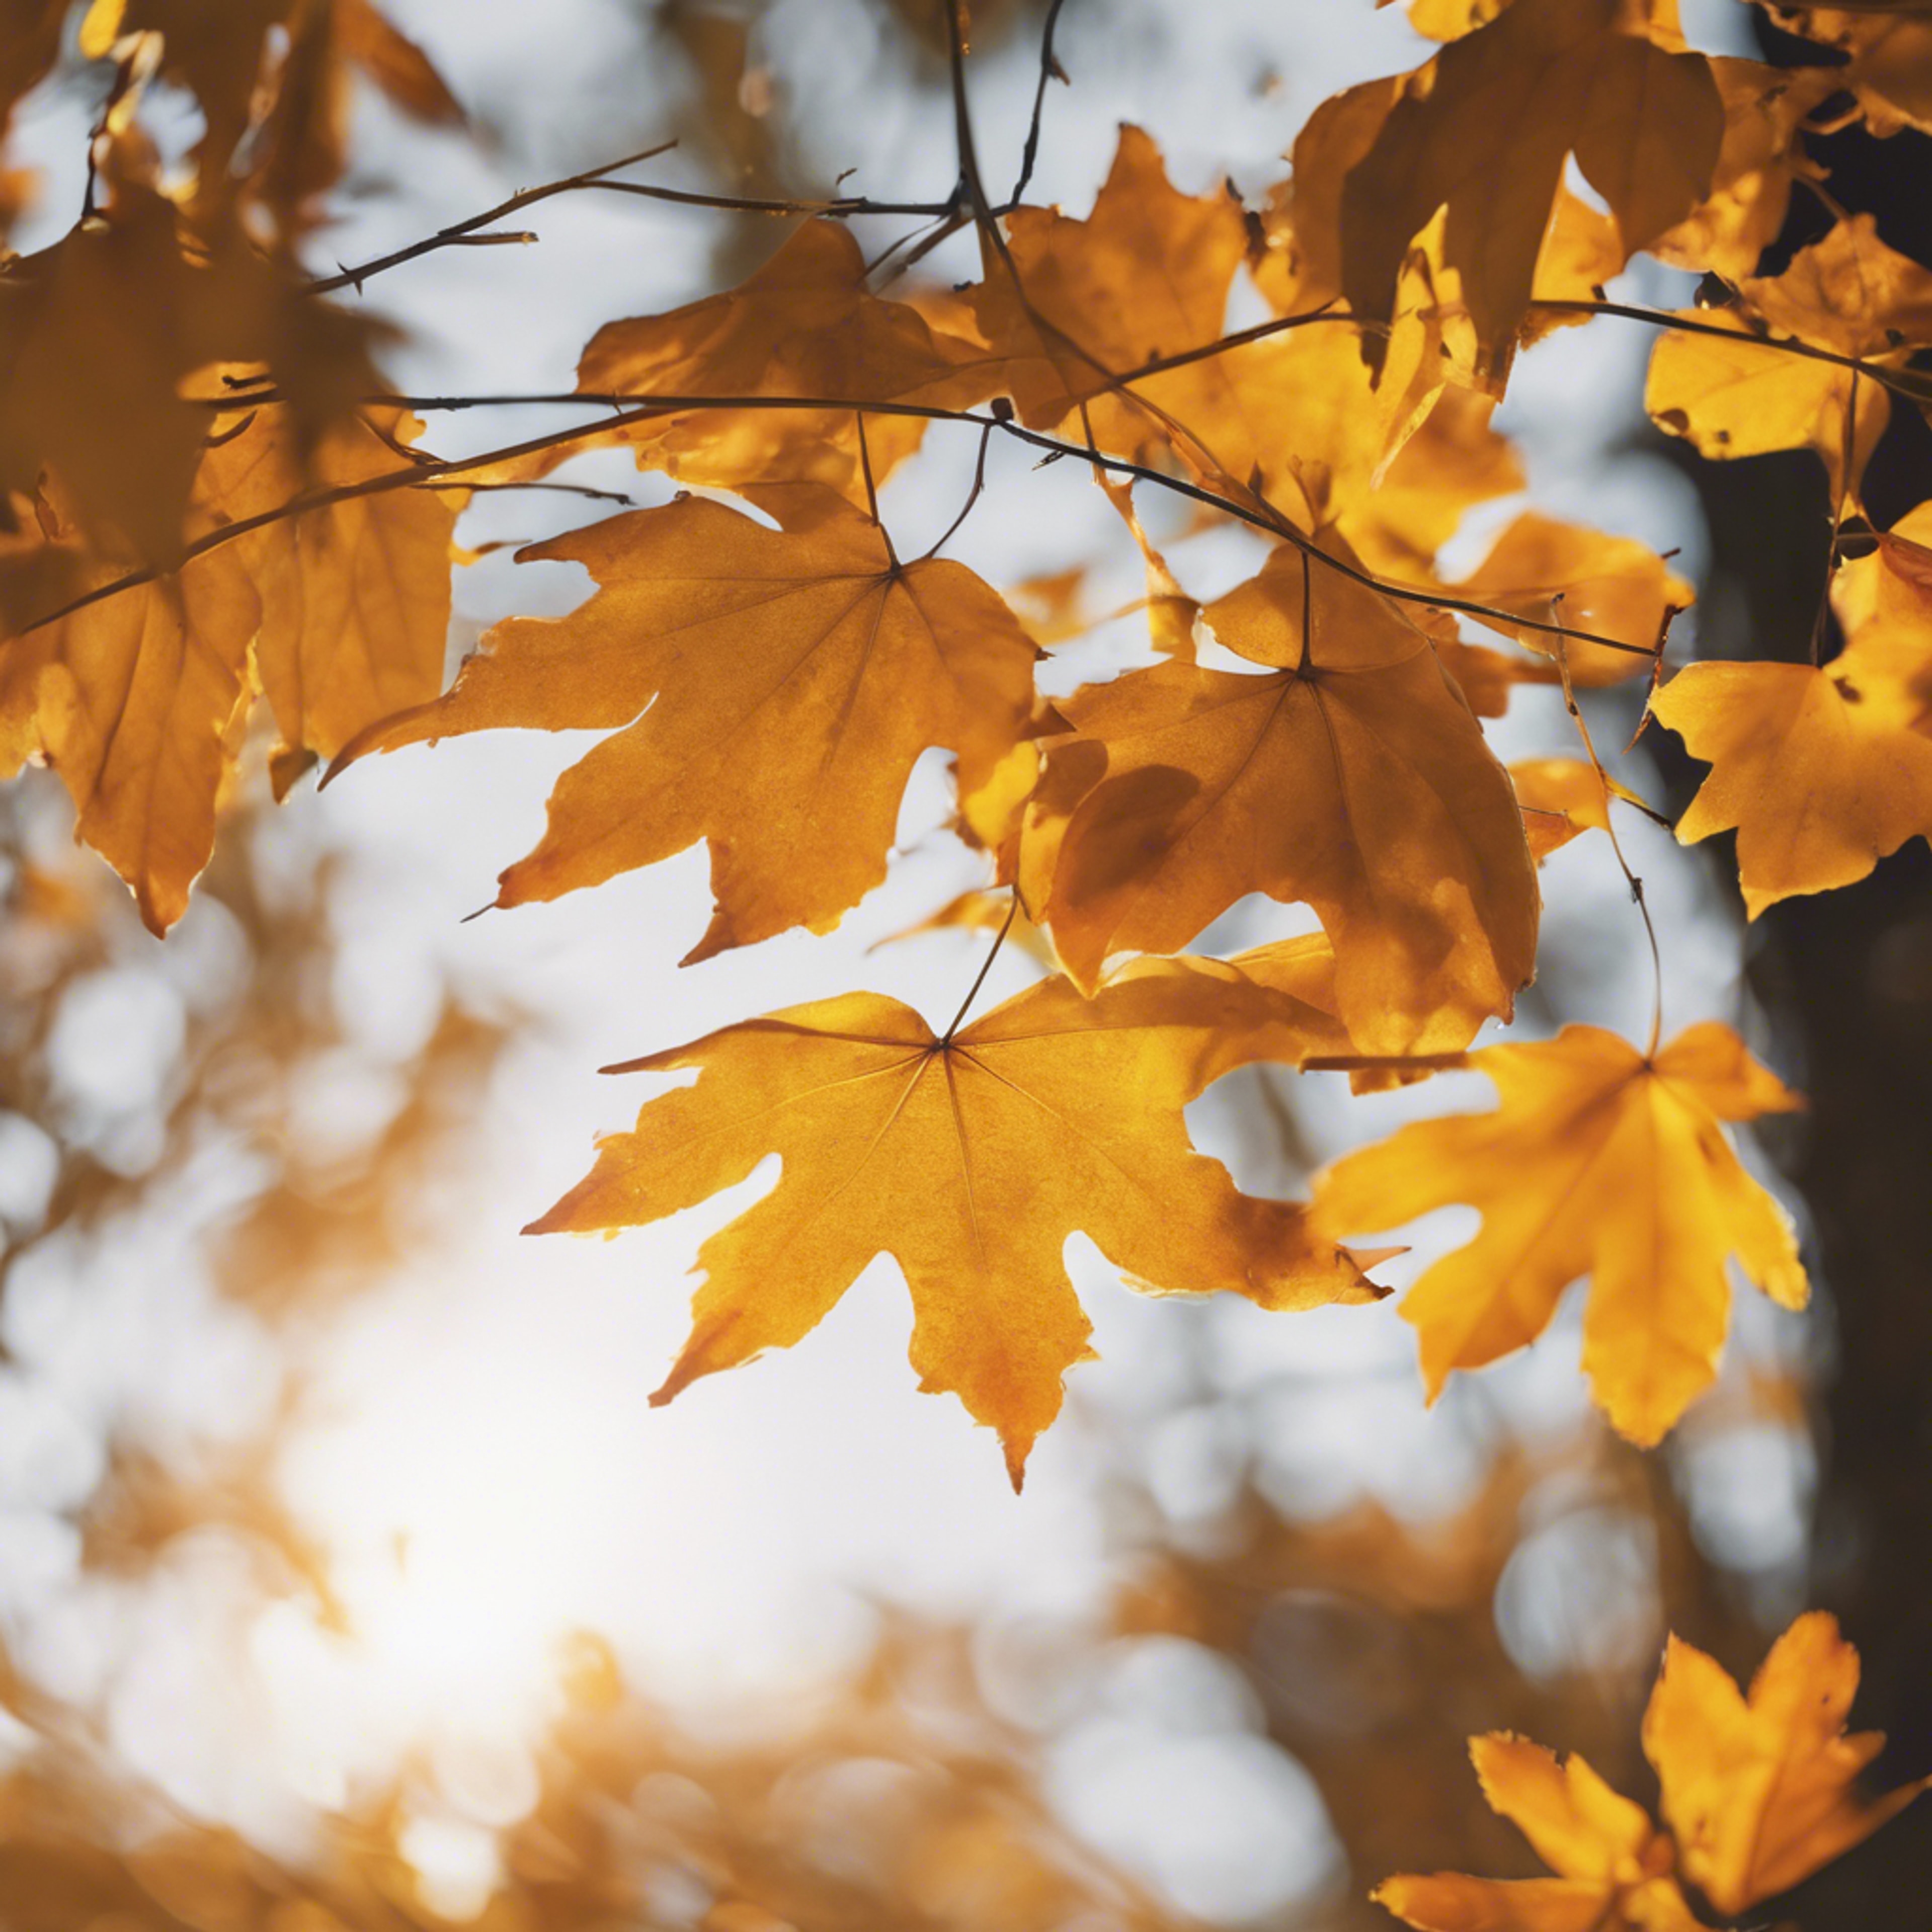 A close look at yellow-orange fall leaves, with the light streaming through. Tapet[f7b27726e627433697dc]